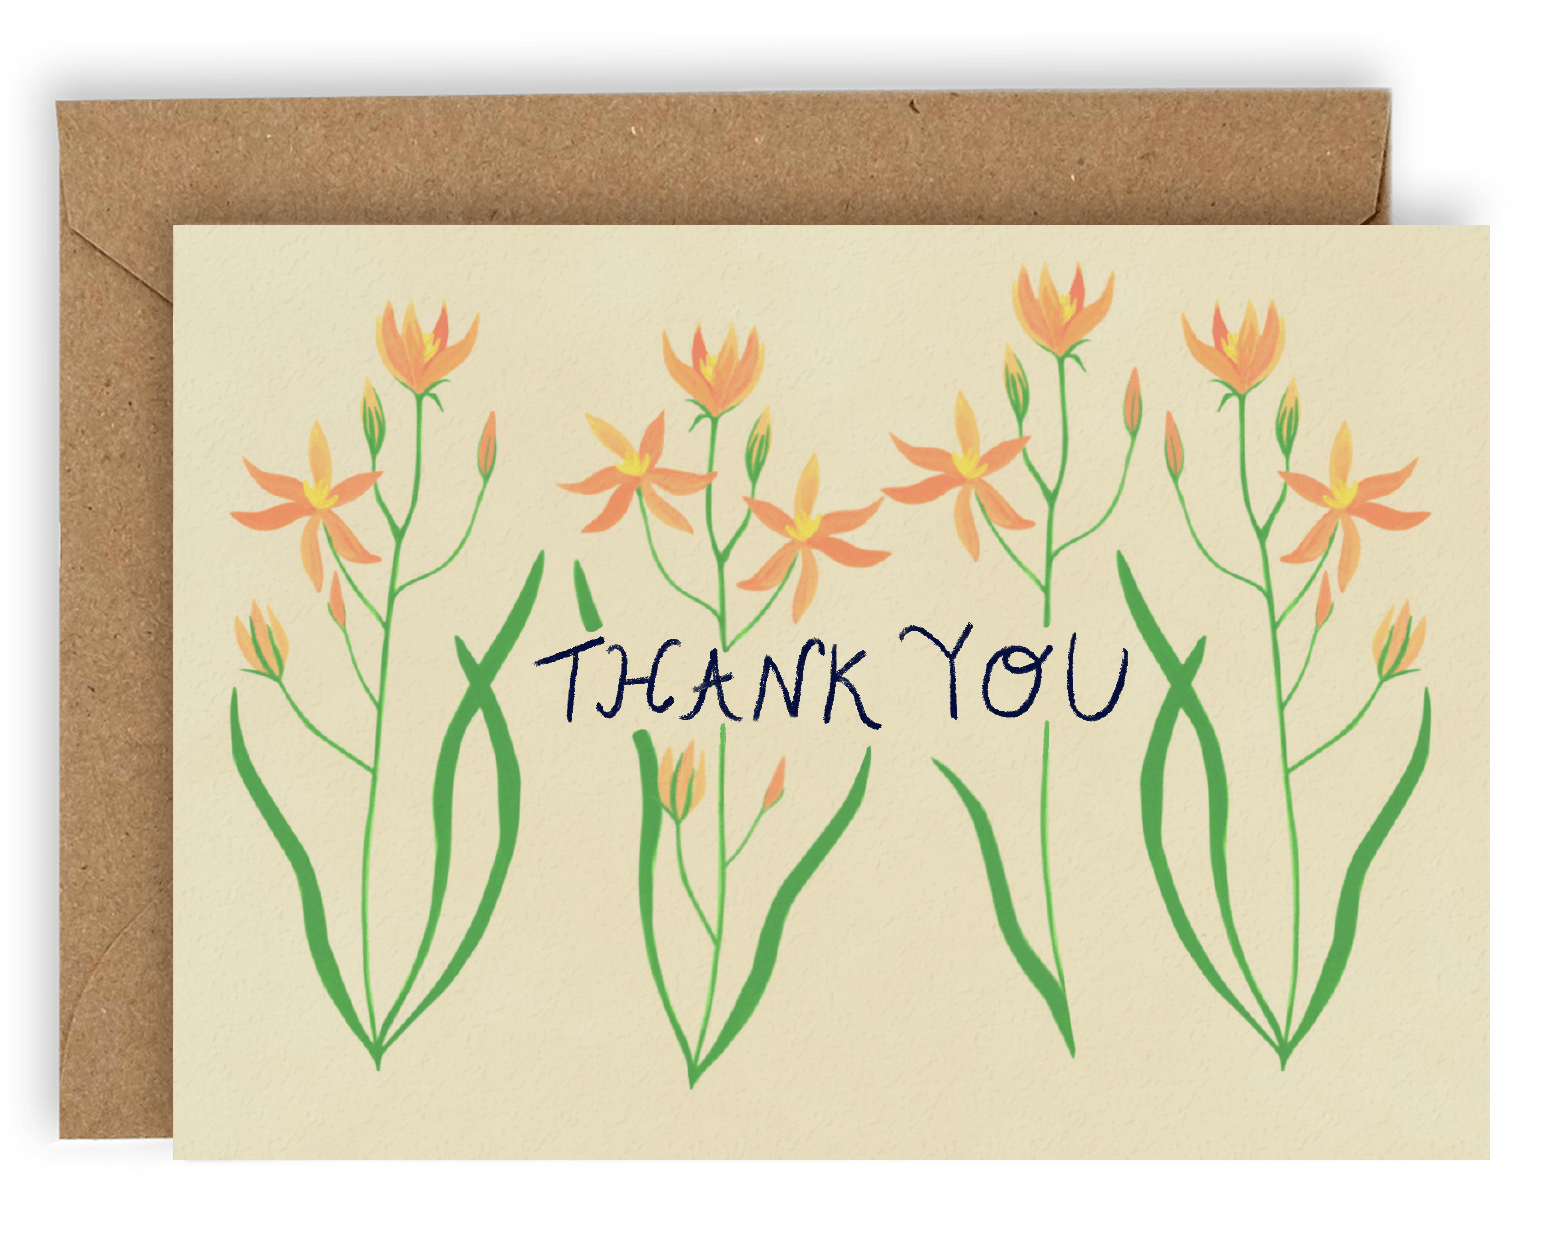 Four stems of orange forest flowers reaching upward cover the card nearly top to bottom horizontally, with the words "Thank You" going through the center of them in black ink. This design is printed on a cream colored background. Shown with Kraft envelope.